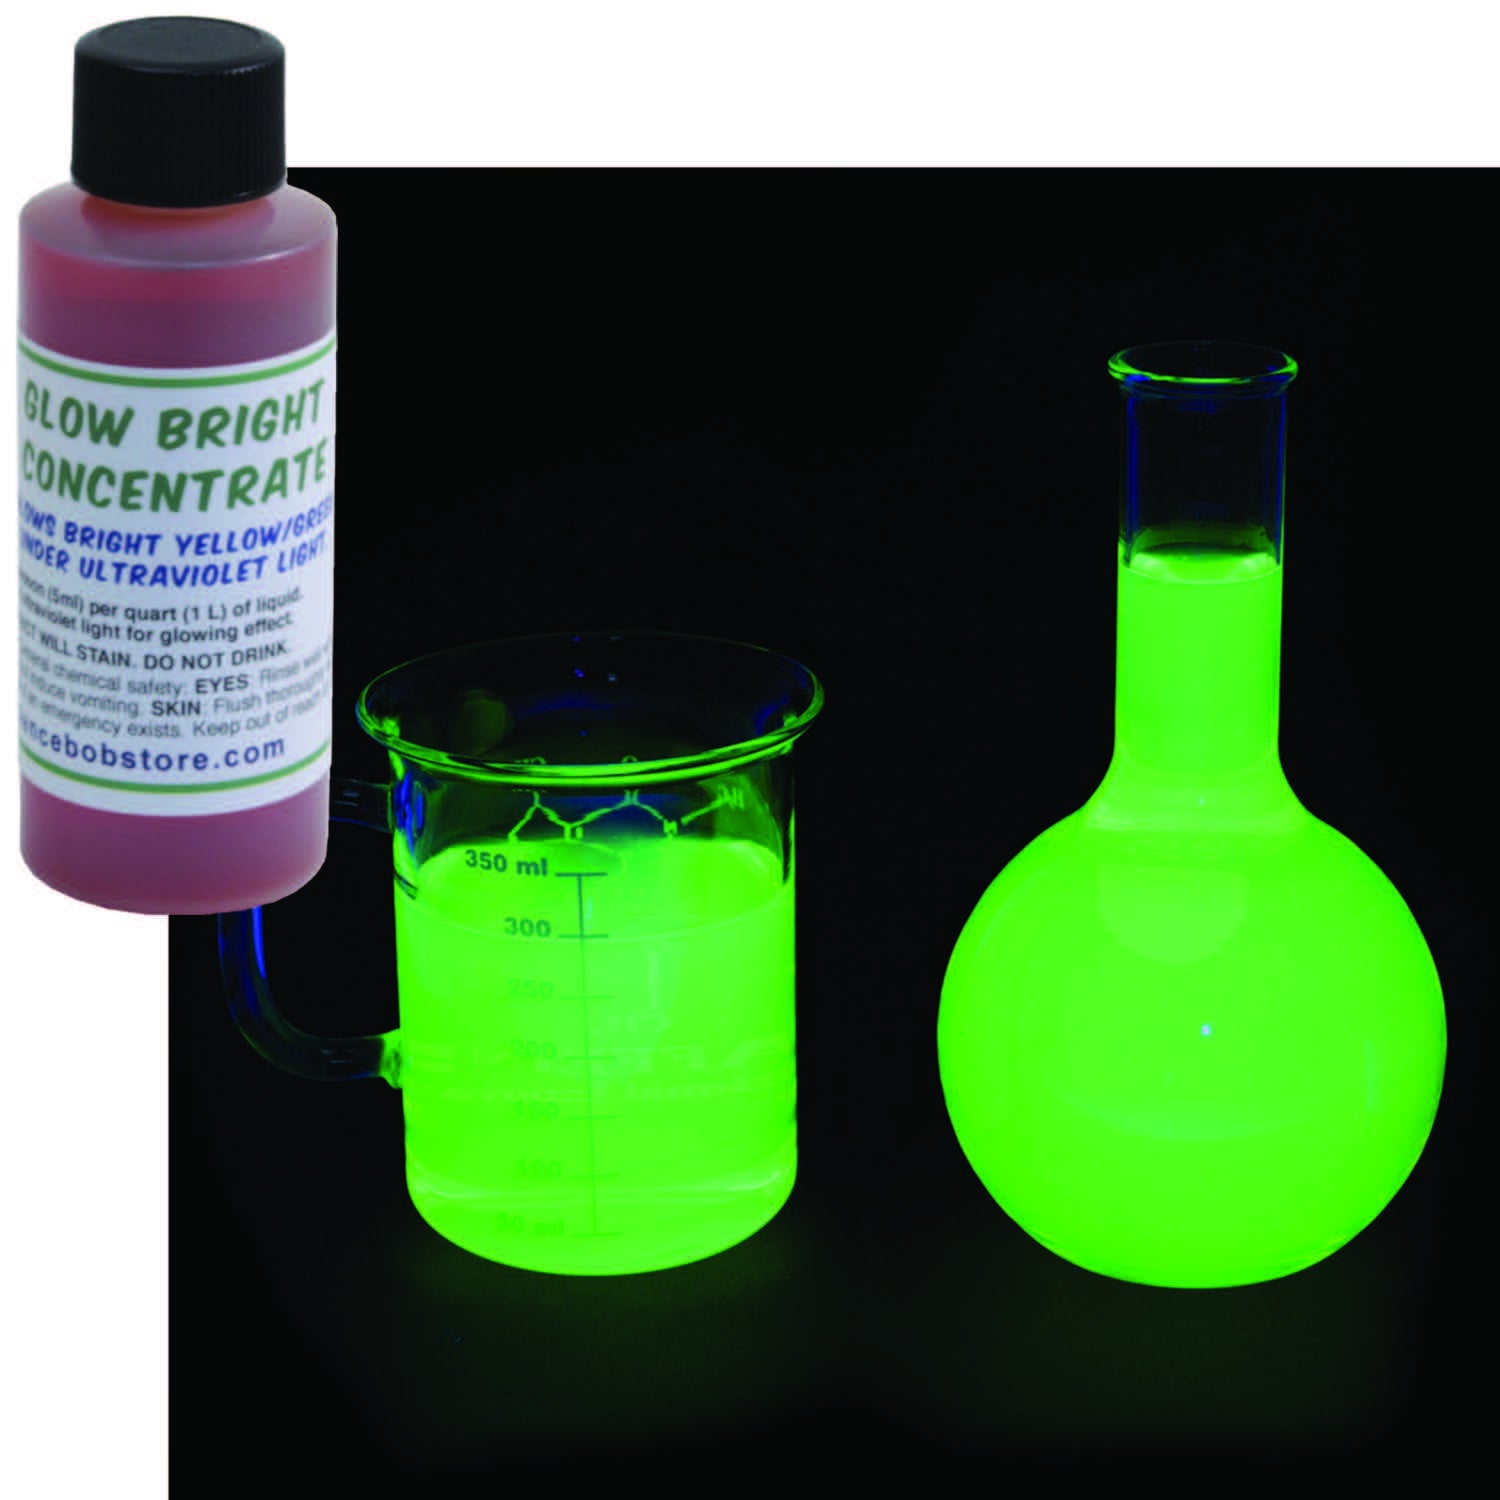 Element compound - use glow-bright concentrate